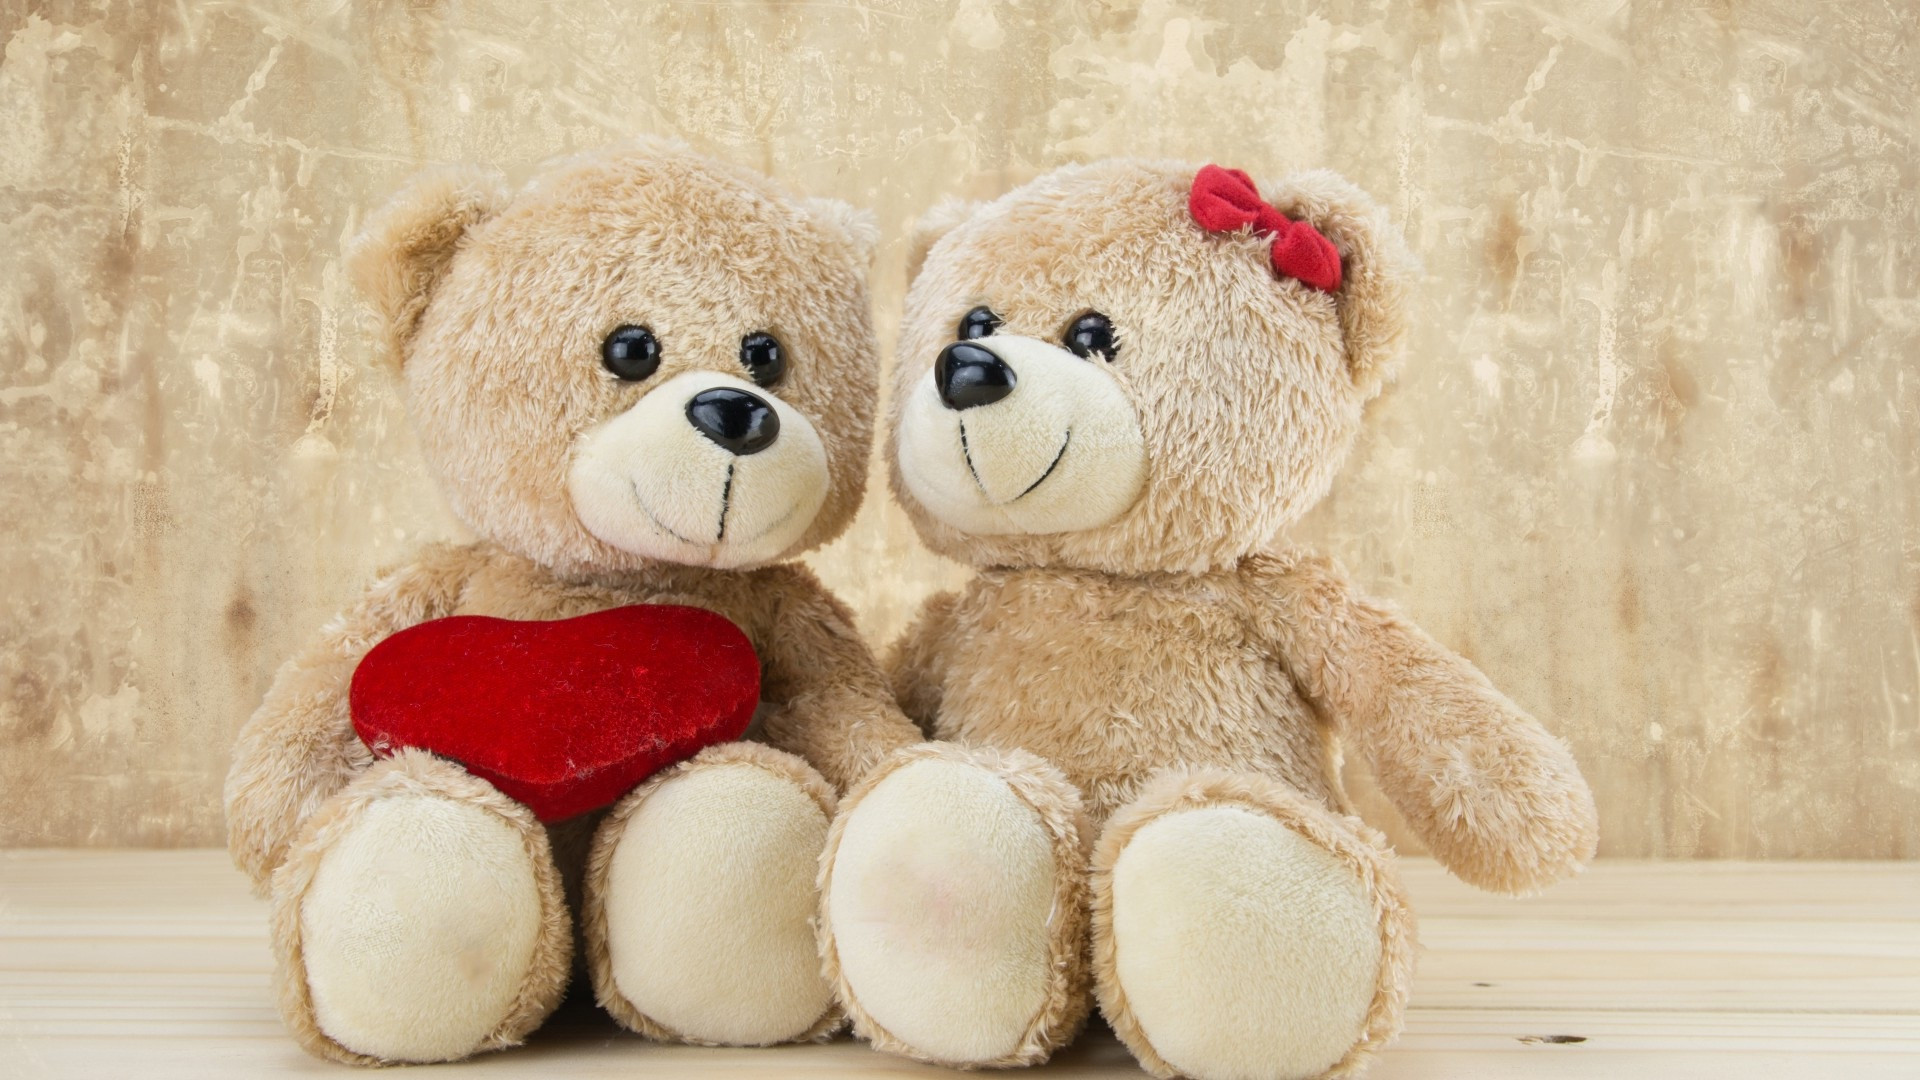 Cute Teddy Bear Couple Nice Wallpapers HD Rocks Adorable Images ...